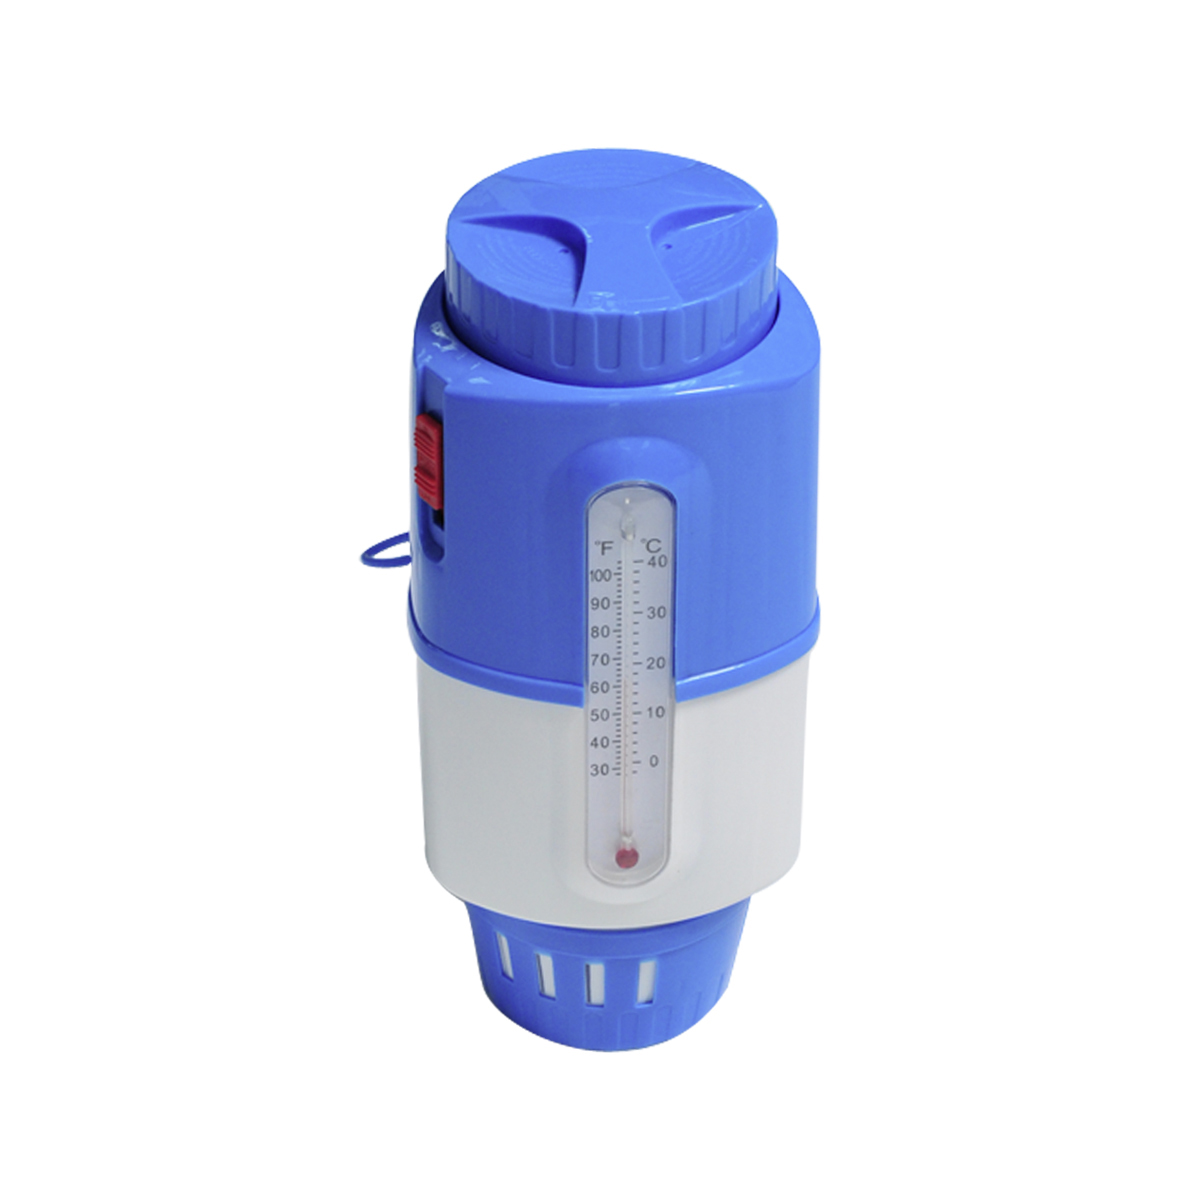 Smart Chlorine Dispenser for 3” tablets with thermometer type “B” blue single packed with lock function Smart Chlorine Dispenser for 3” tablets with thermometer type “B” blue single packed with lock function